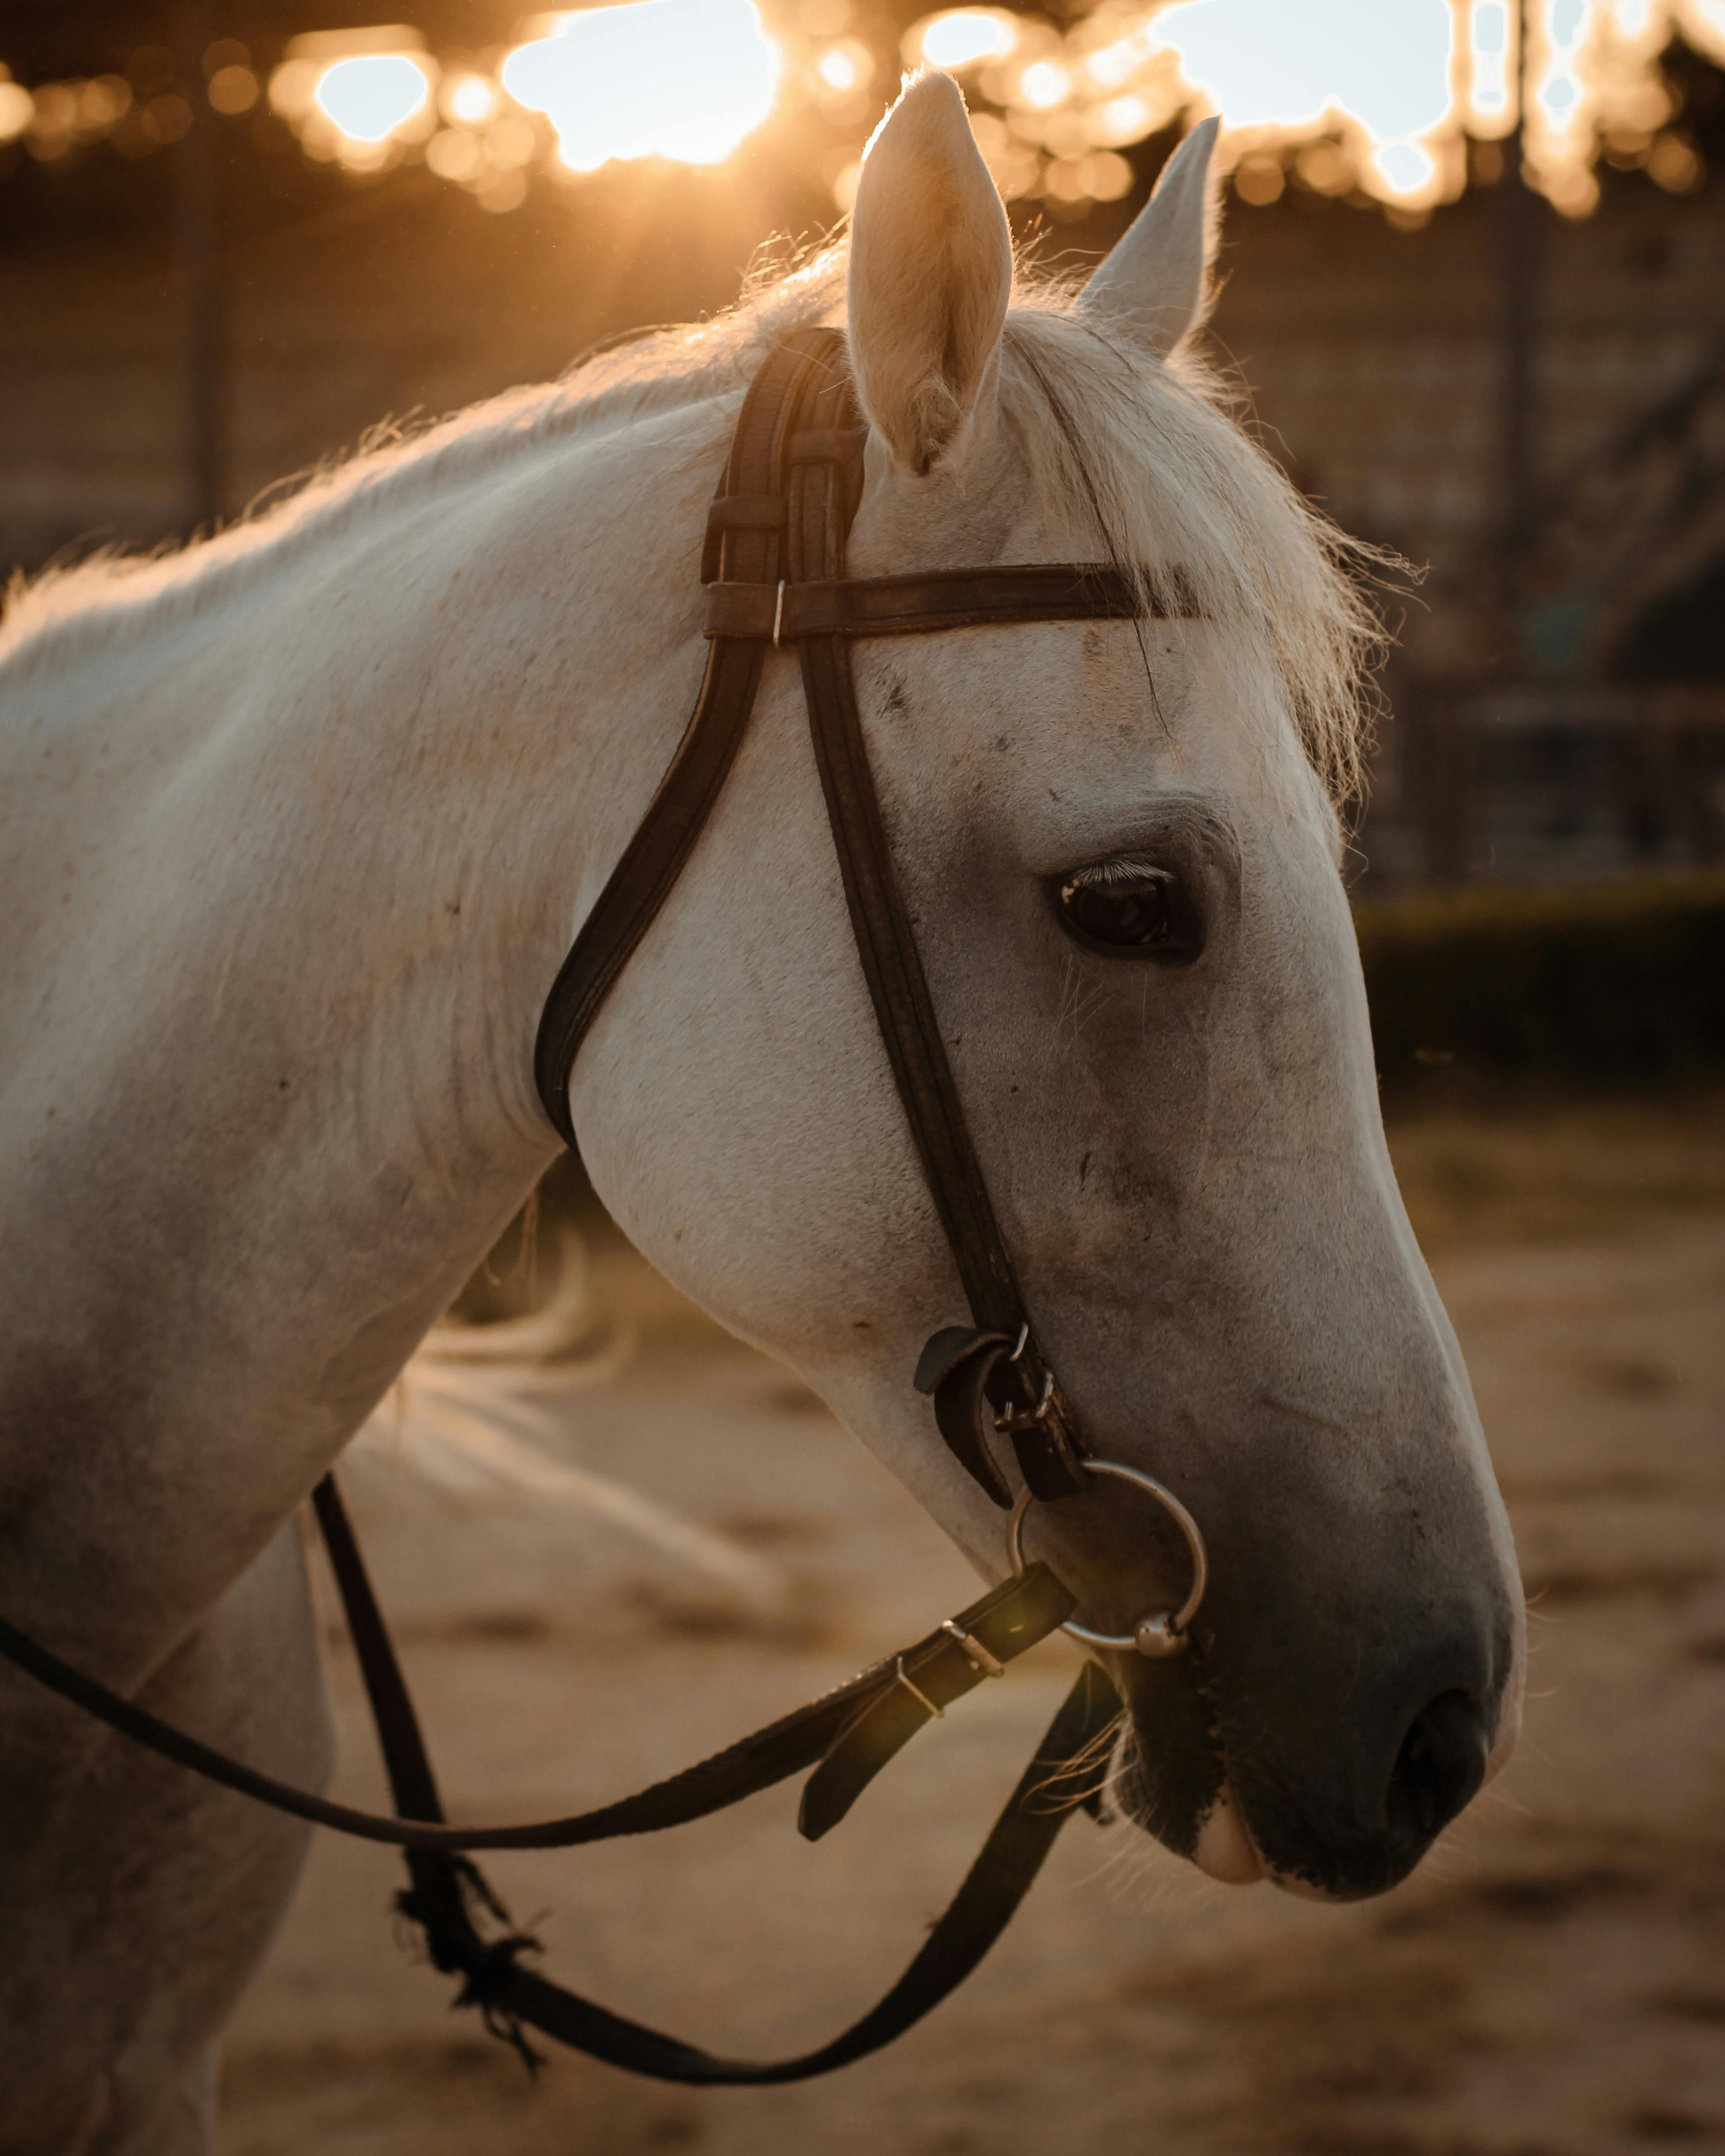 Animals. Horse. The face of a beautiful white horse in a bridle with a  silver ornament and women's hands Stock Photo